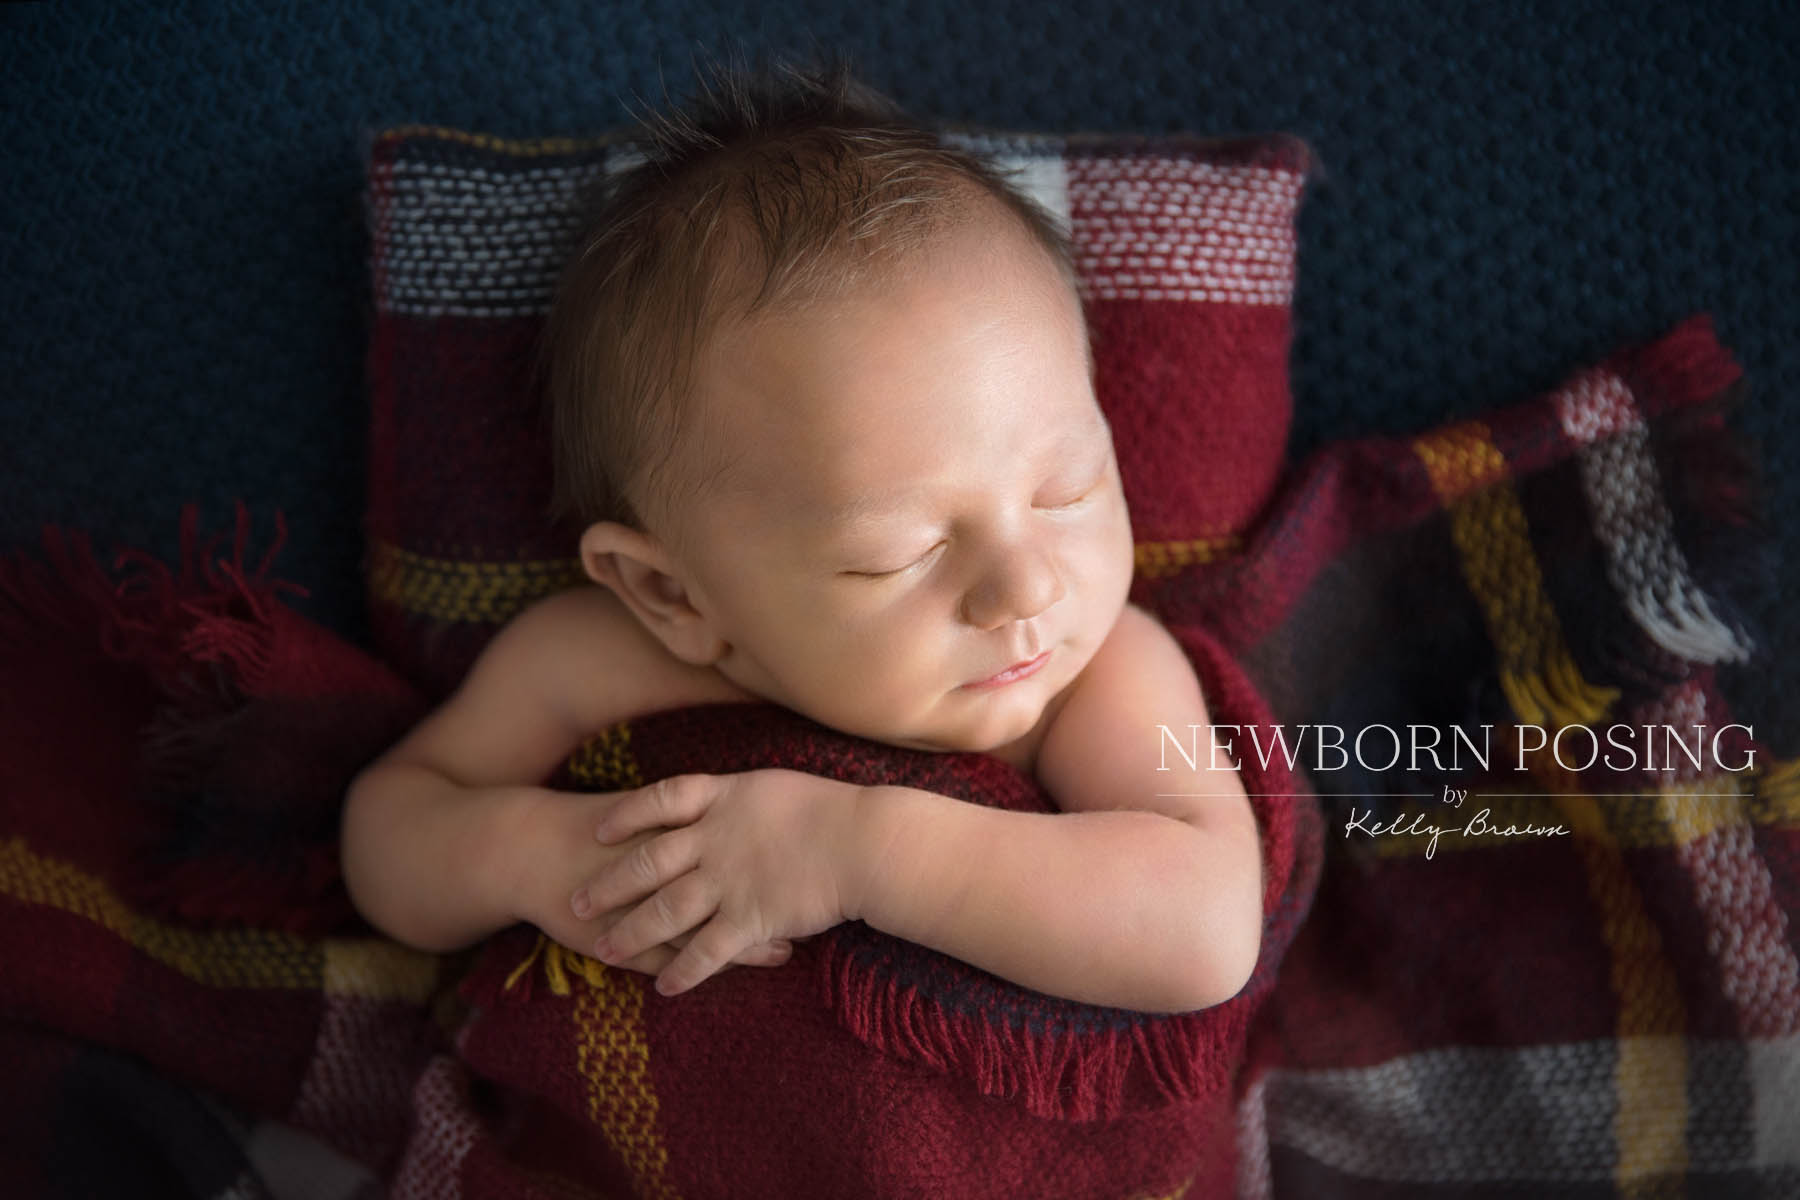 Newborn photography of baby lying on back in a bed